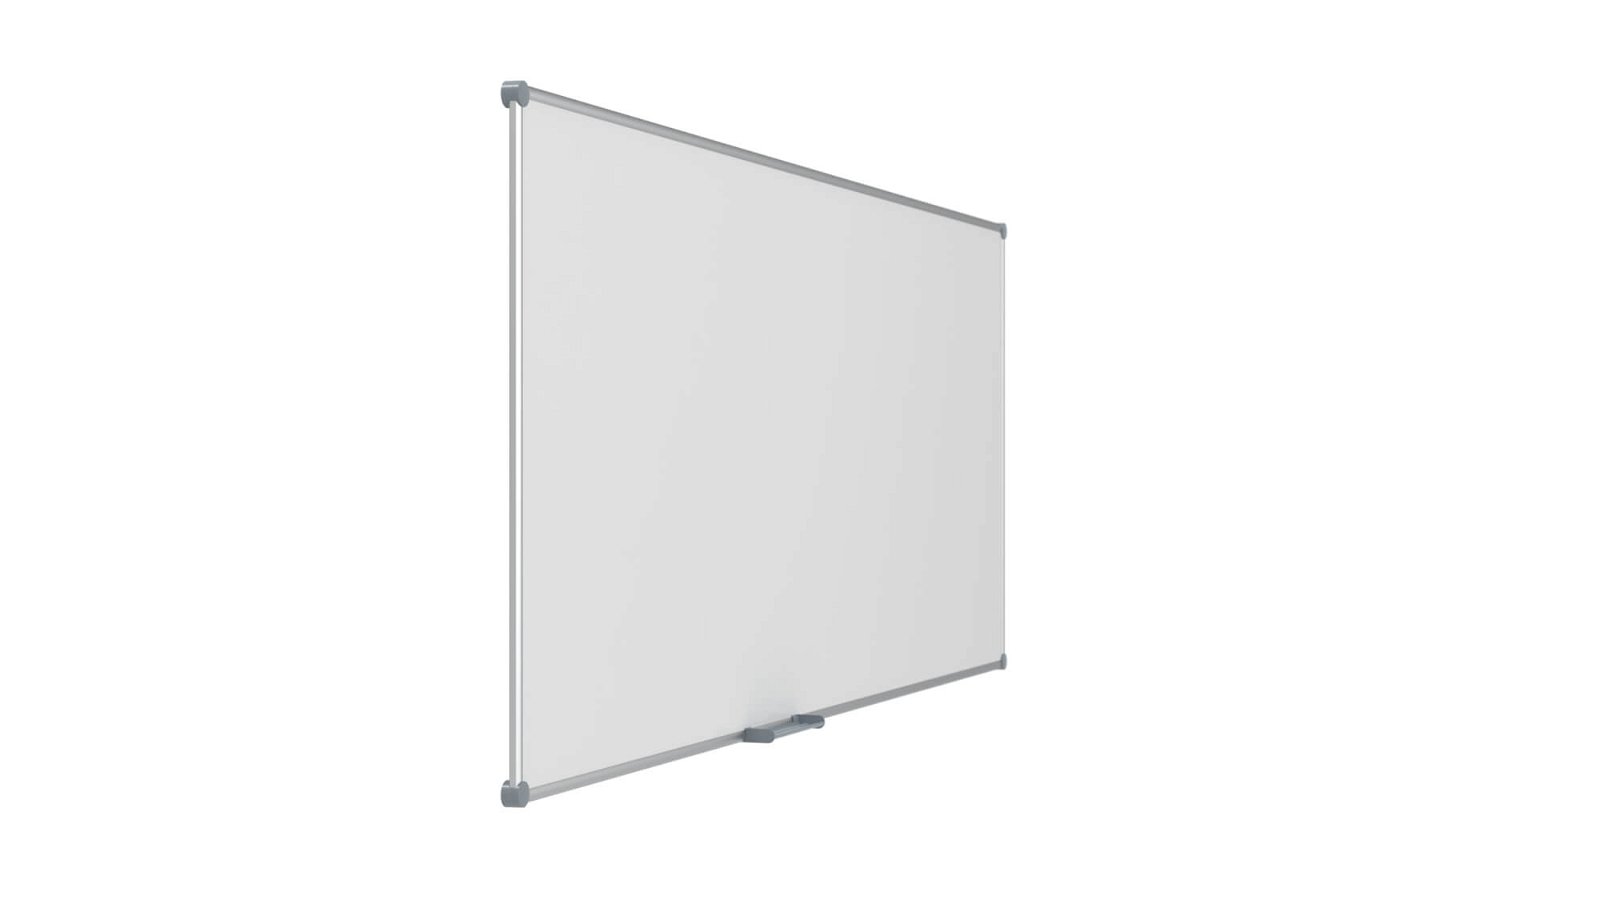 Whiteboard 2000 MAULpro, Emaille, 120x300 cm, grau